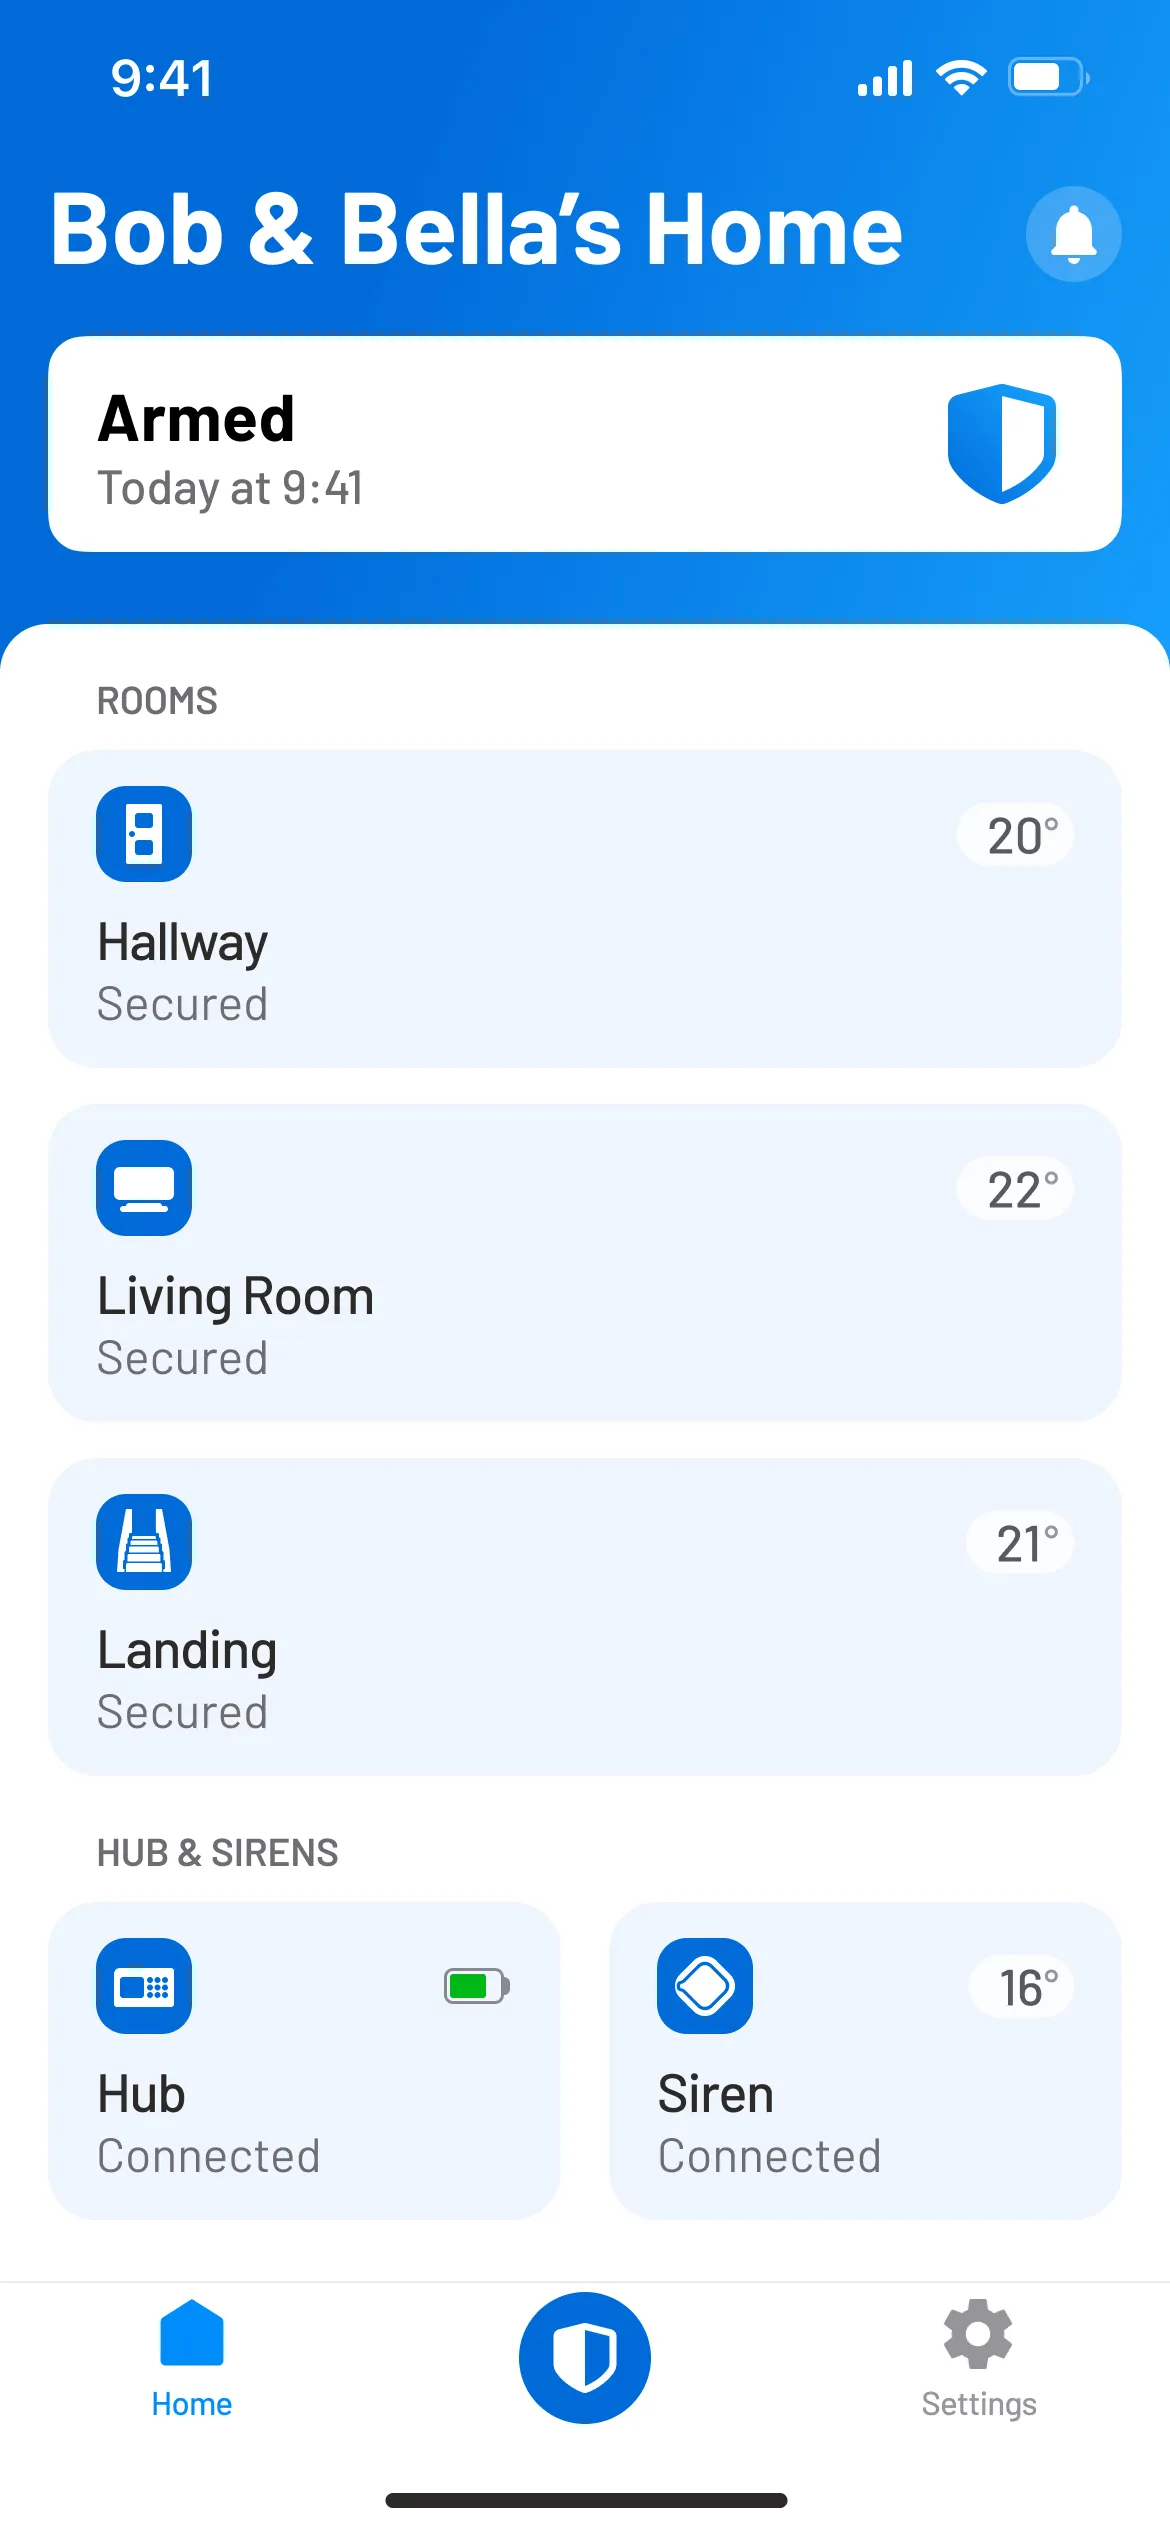 Smartphone screen of 'Bob & Bella's Home' alarm app armed at 9:41, with secure room statuses and connected hub and siren.